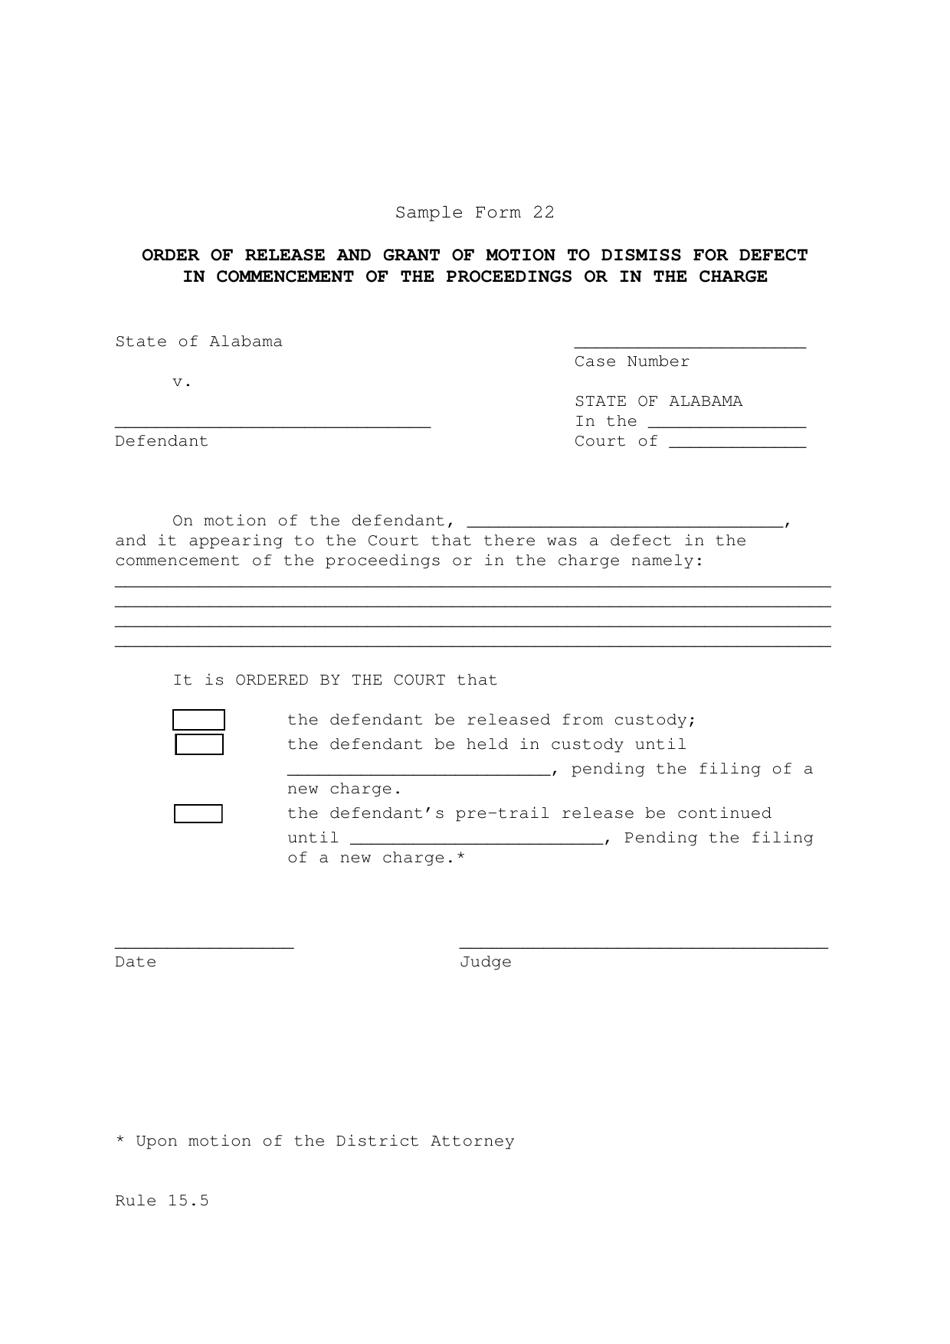 Sample Form 22 Order of Release and Grant of Motion to Dismiss for Defect in Commencement of the Proceedings or in the Charge - Alabama, Page 1